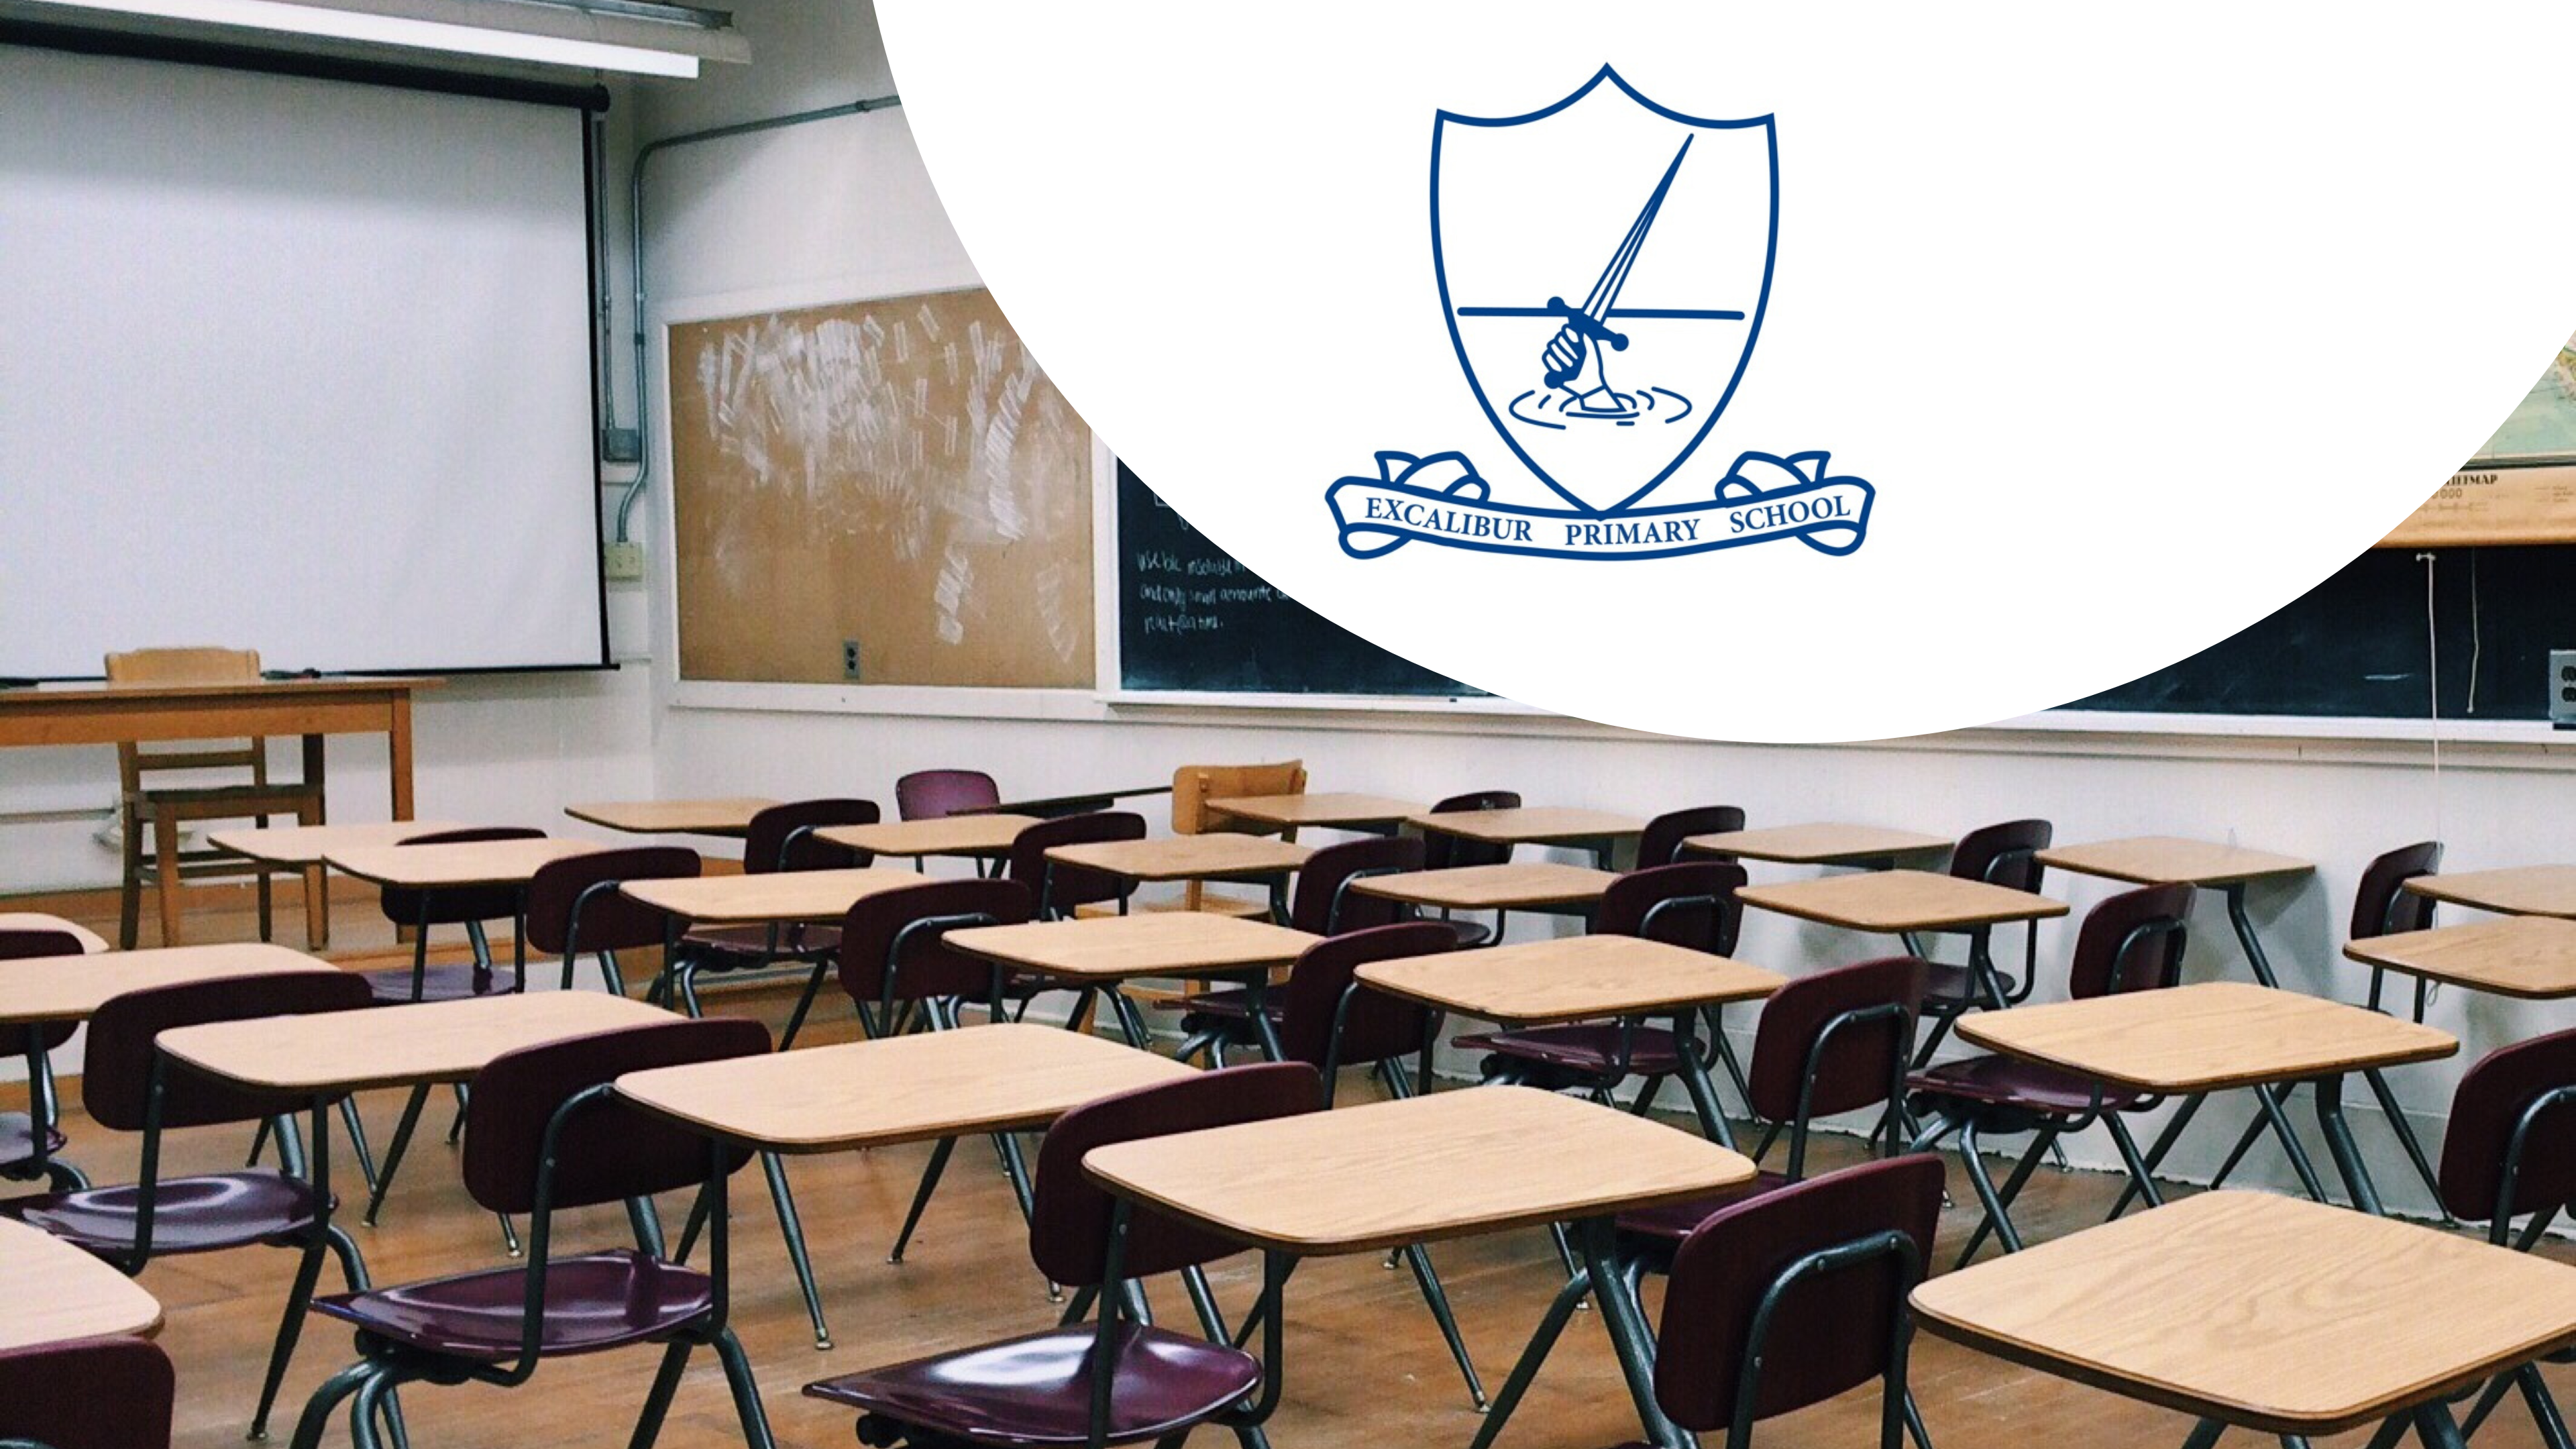 Chespack Hygiene provides a safe cleaning chemical for school.